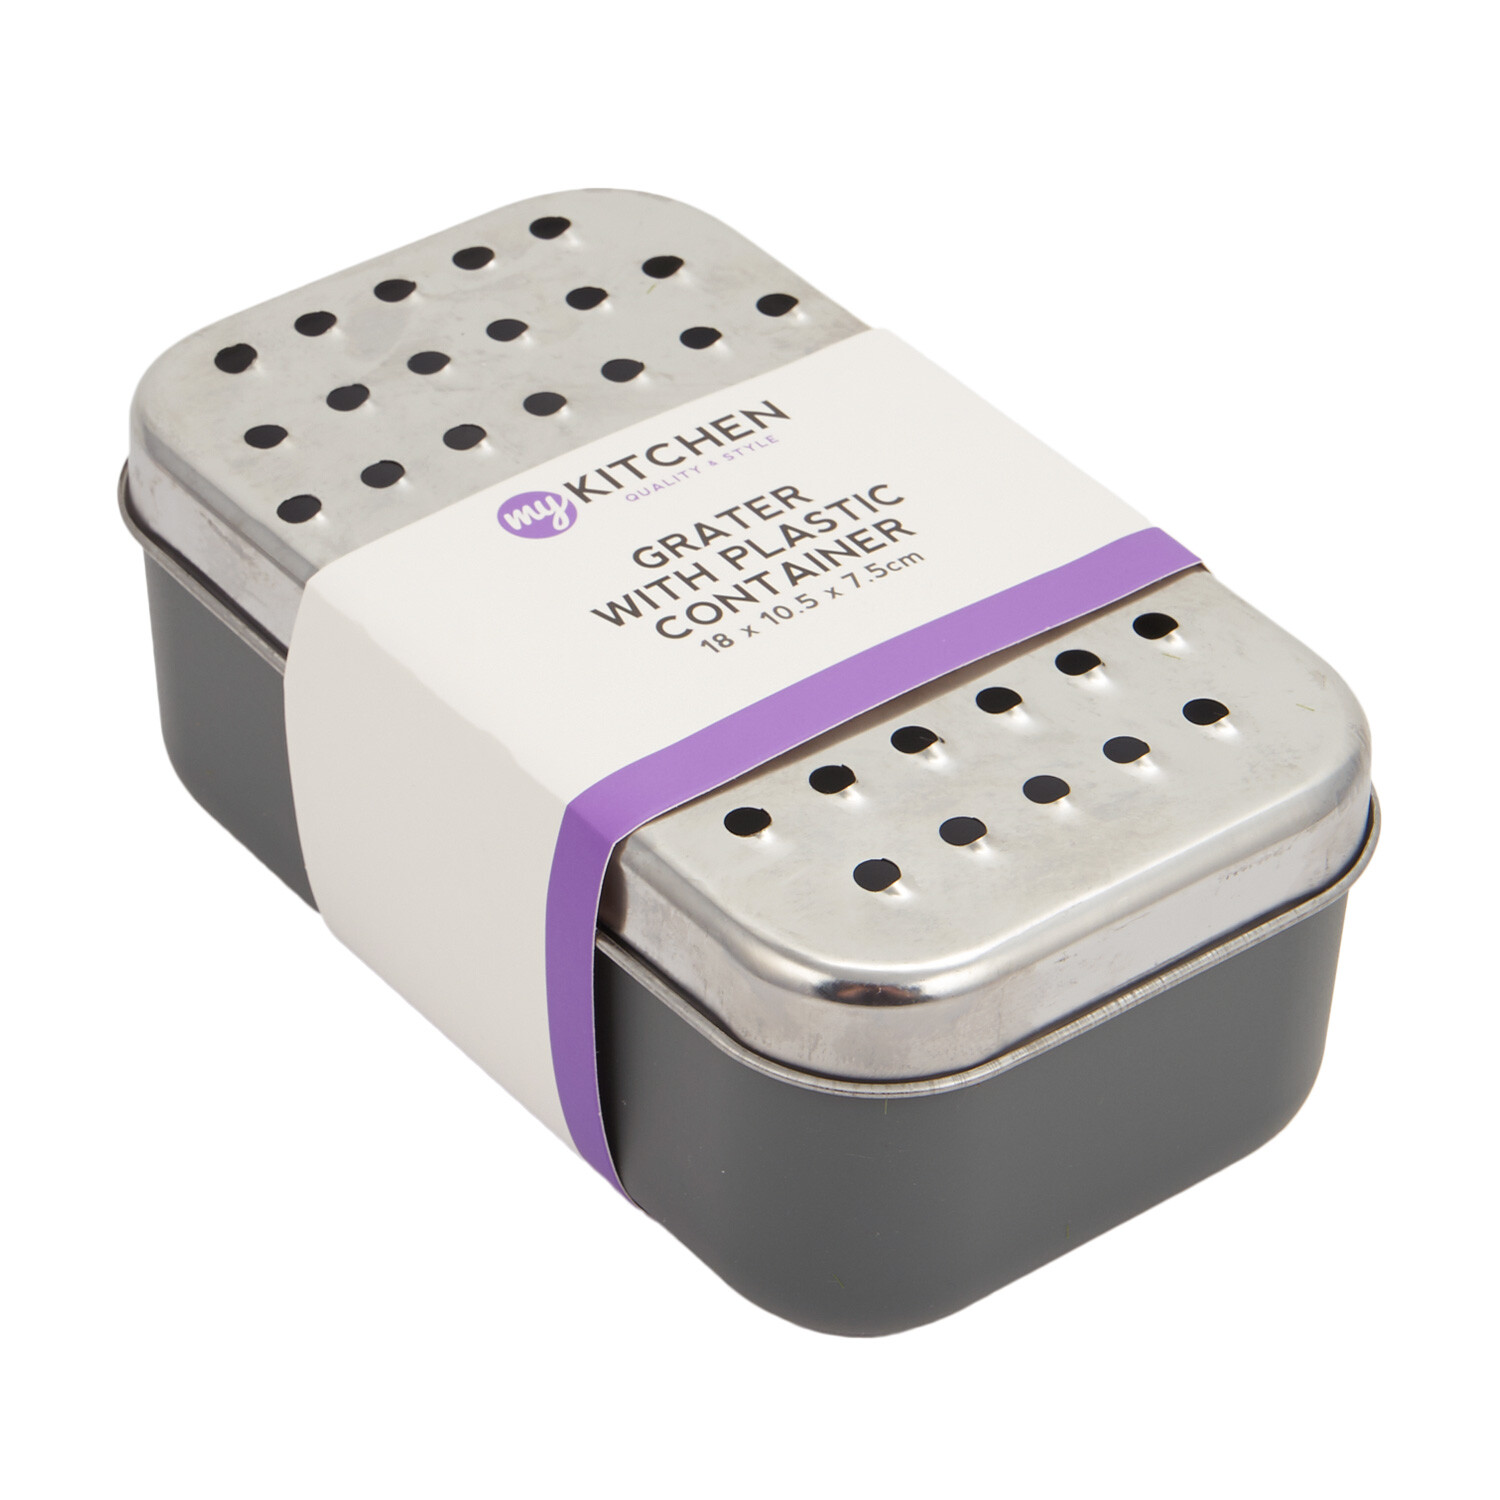 Grater with Plastic Container - Grey Image 1